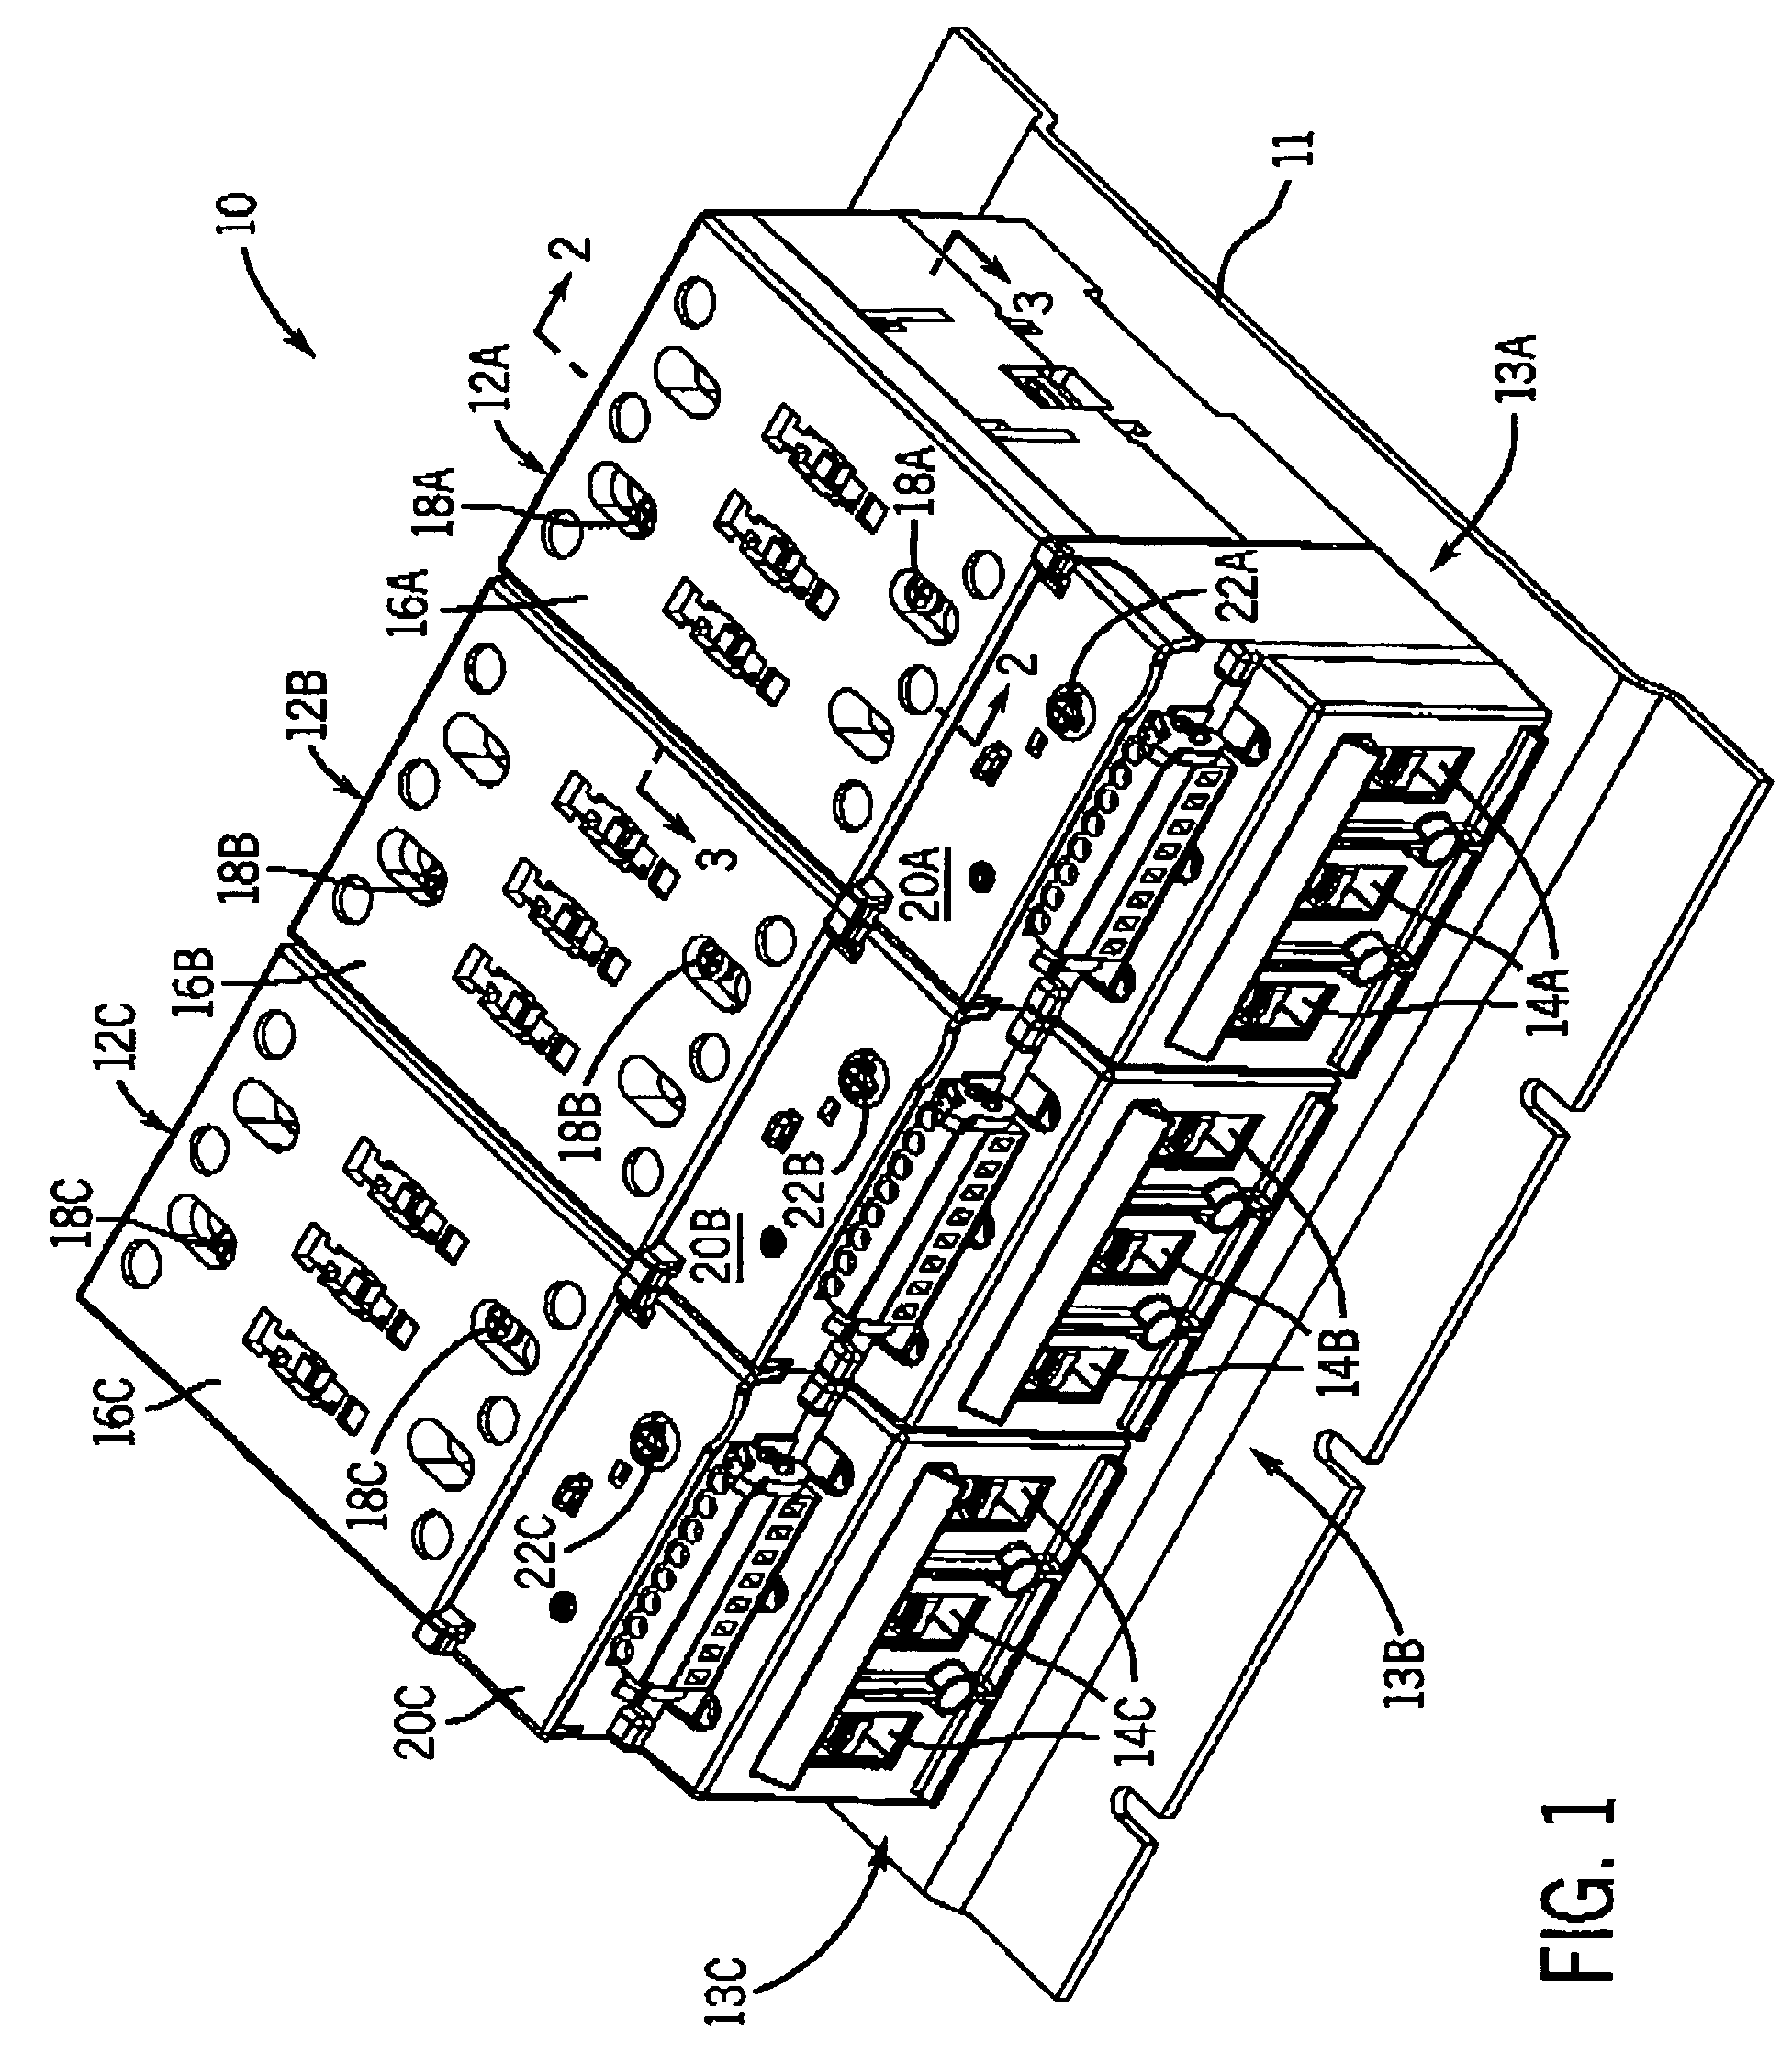 Modular contactor assembly having independently controllable contractors